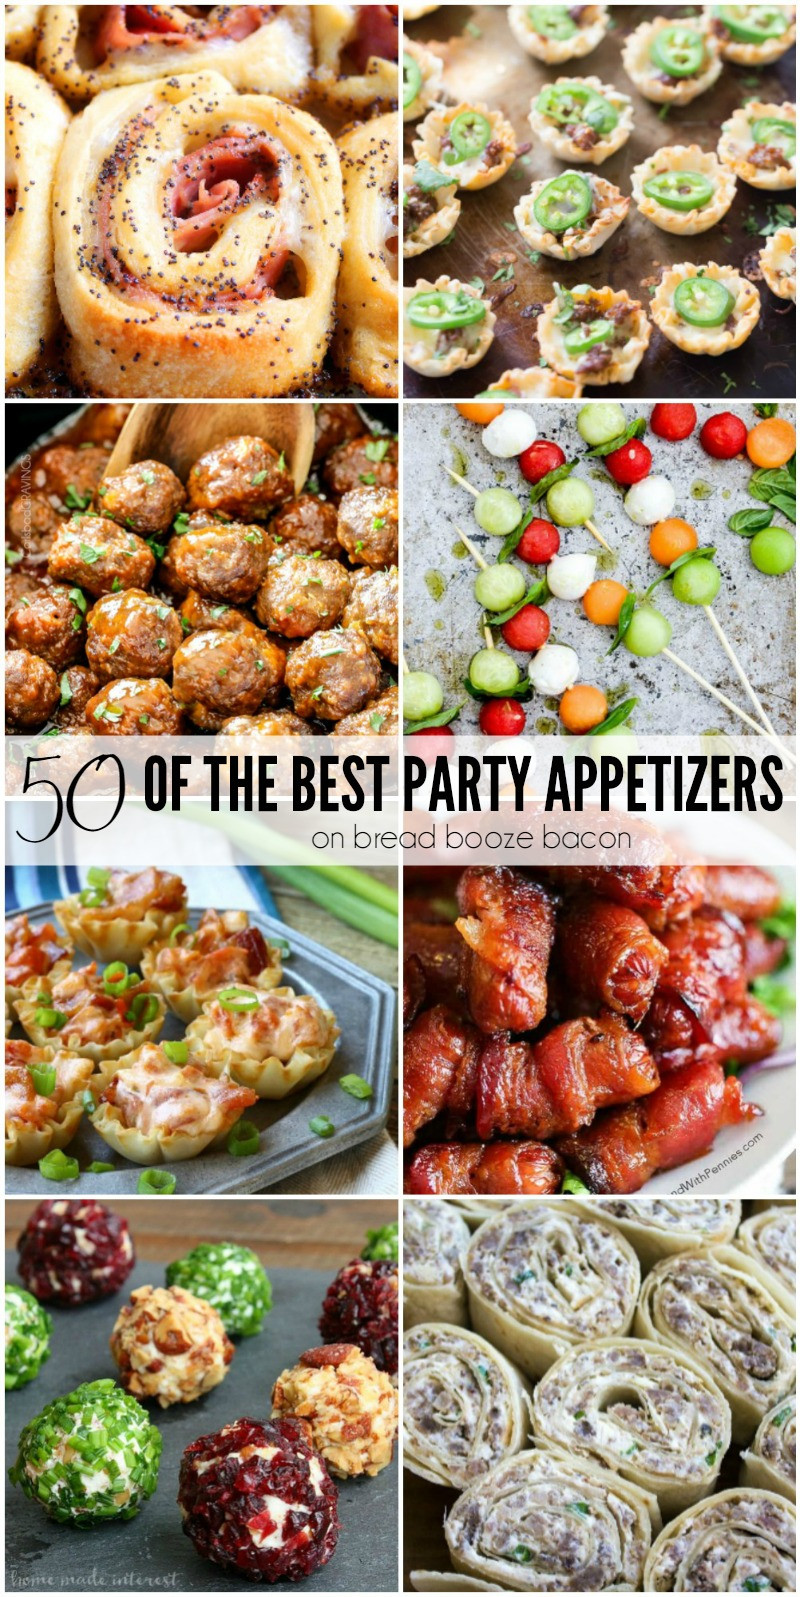 Best Appetizers For Christmas Party
 50 of the Best Party Appetizers • Bread Booze Bacon